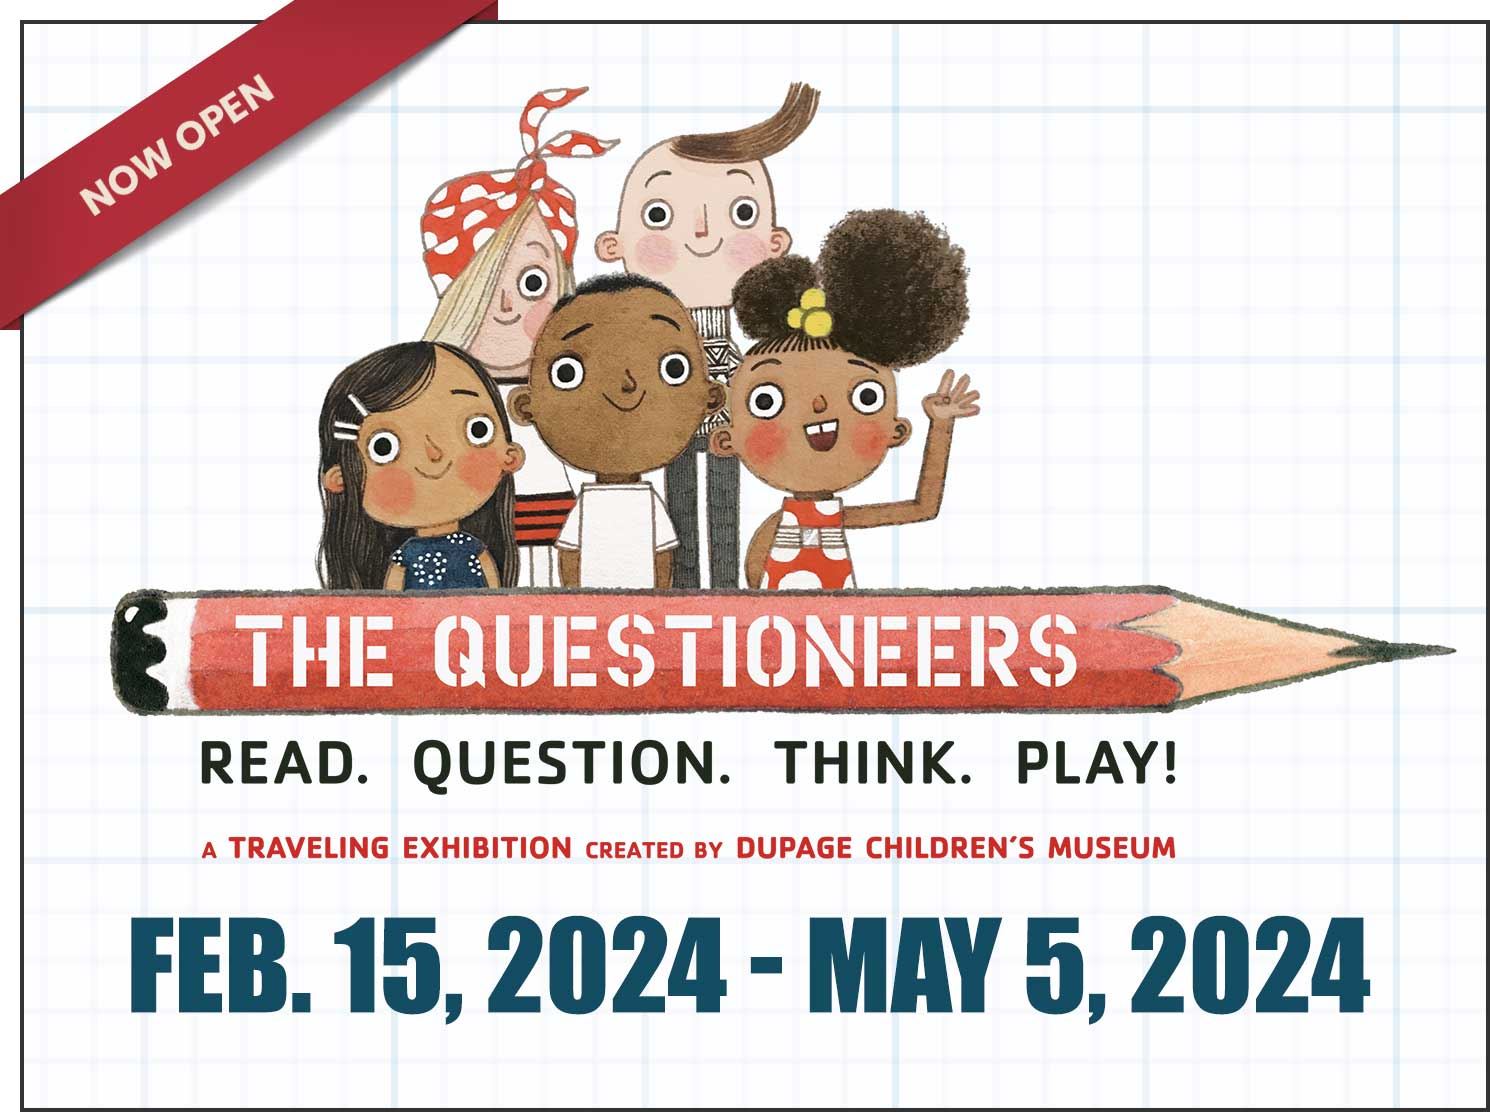 The Questioneers - Opens February 16, 2024